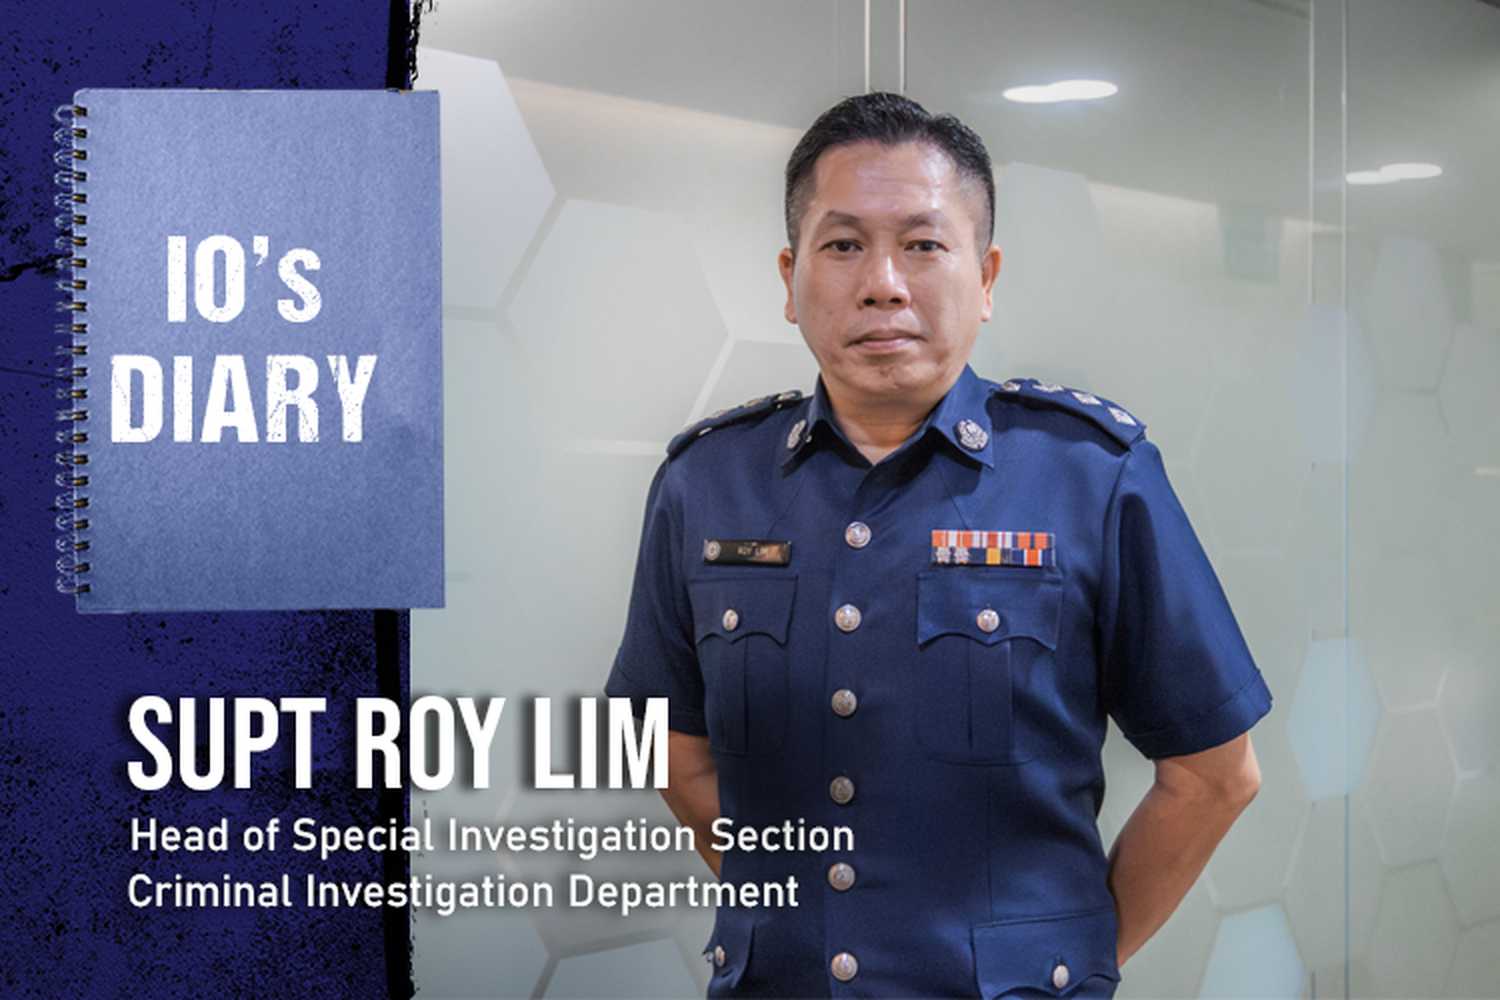 Superintendent of Police (Supt) Roy Lim in a close-up profile shot of the cover photo of the IO's diary series, where his name is shown on screen, along with the words 'Head of Special Investigation Section' and 'Criminal Investigation Department'. He is in uniform.